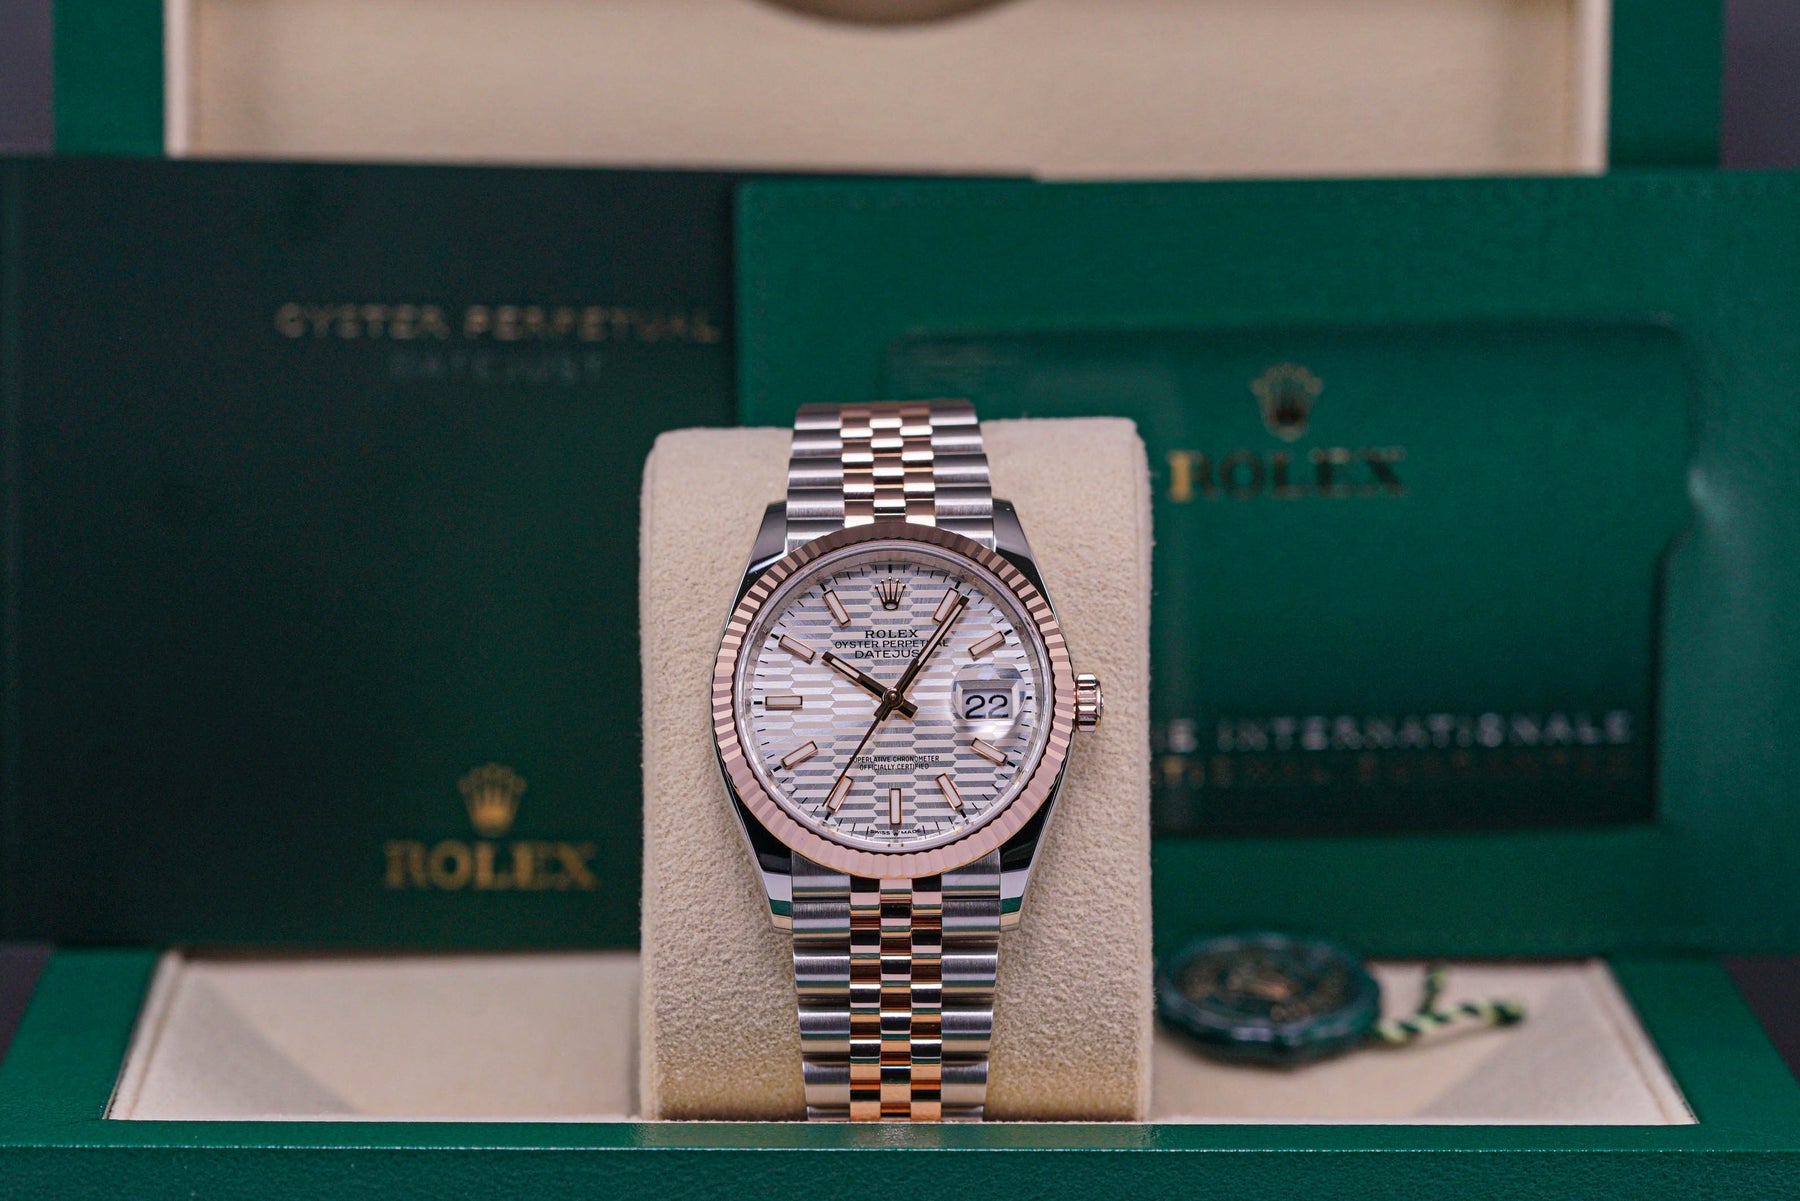 DATEJUST 36MM TWOTONE ROSEGOLD SILVER FLUTED DIAL FLUTED JUBILEE